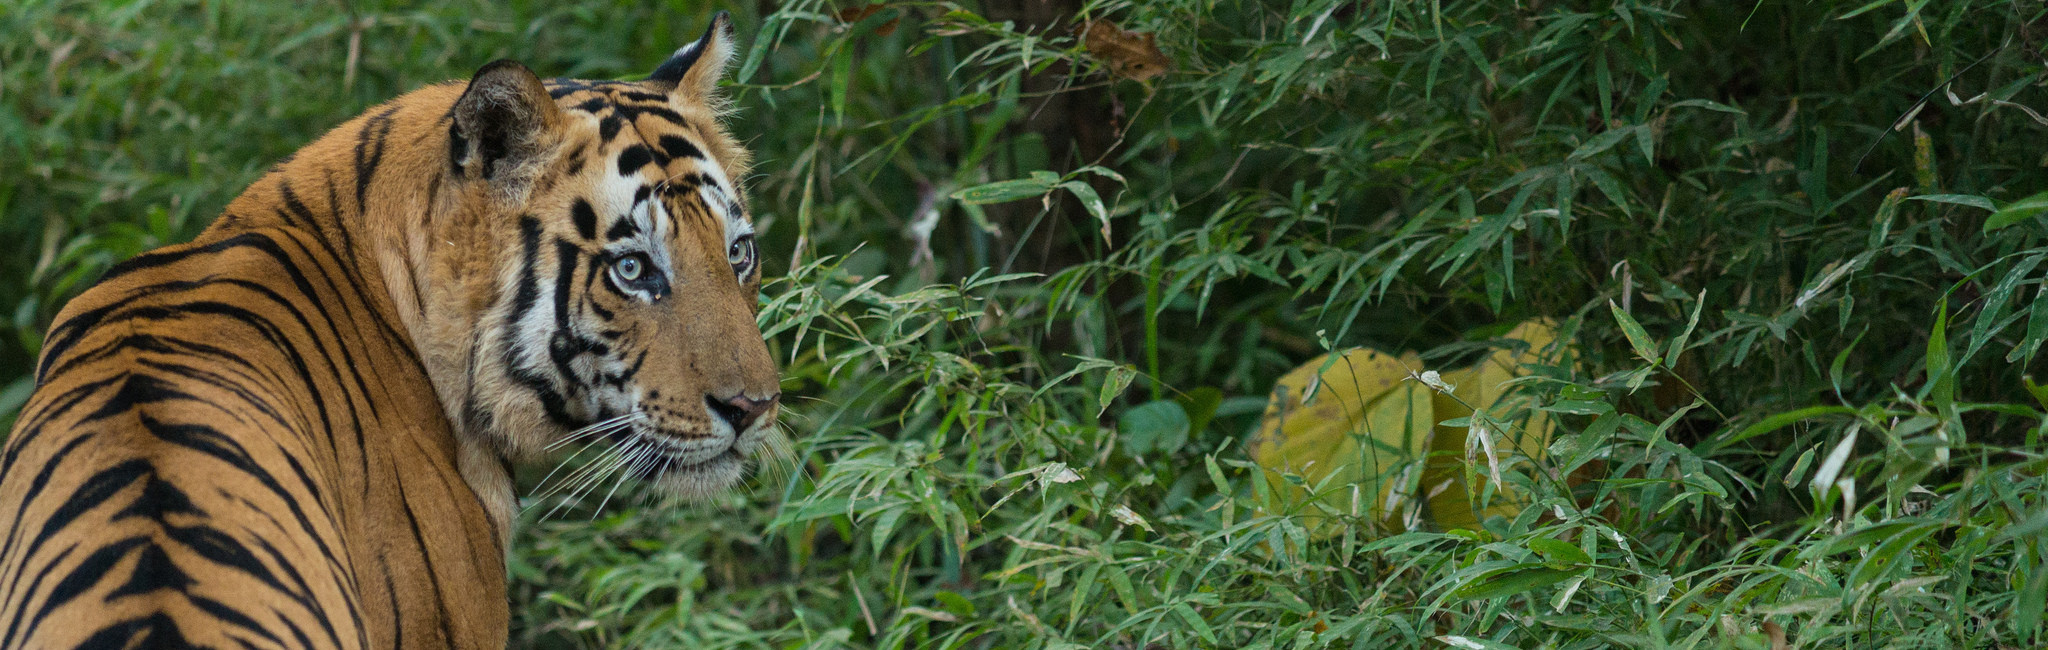 A tiger in Ranthambore, Rajasthan. Credit: Christopher Kray/Flickr, CC BY 2.0